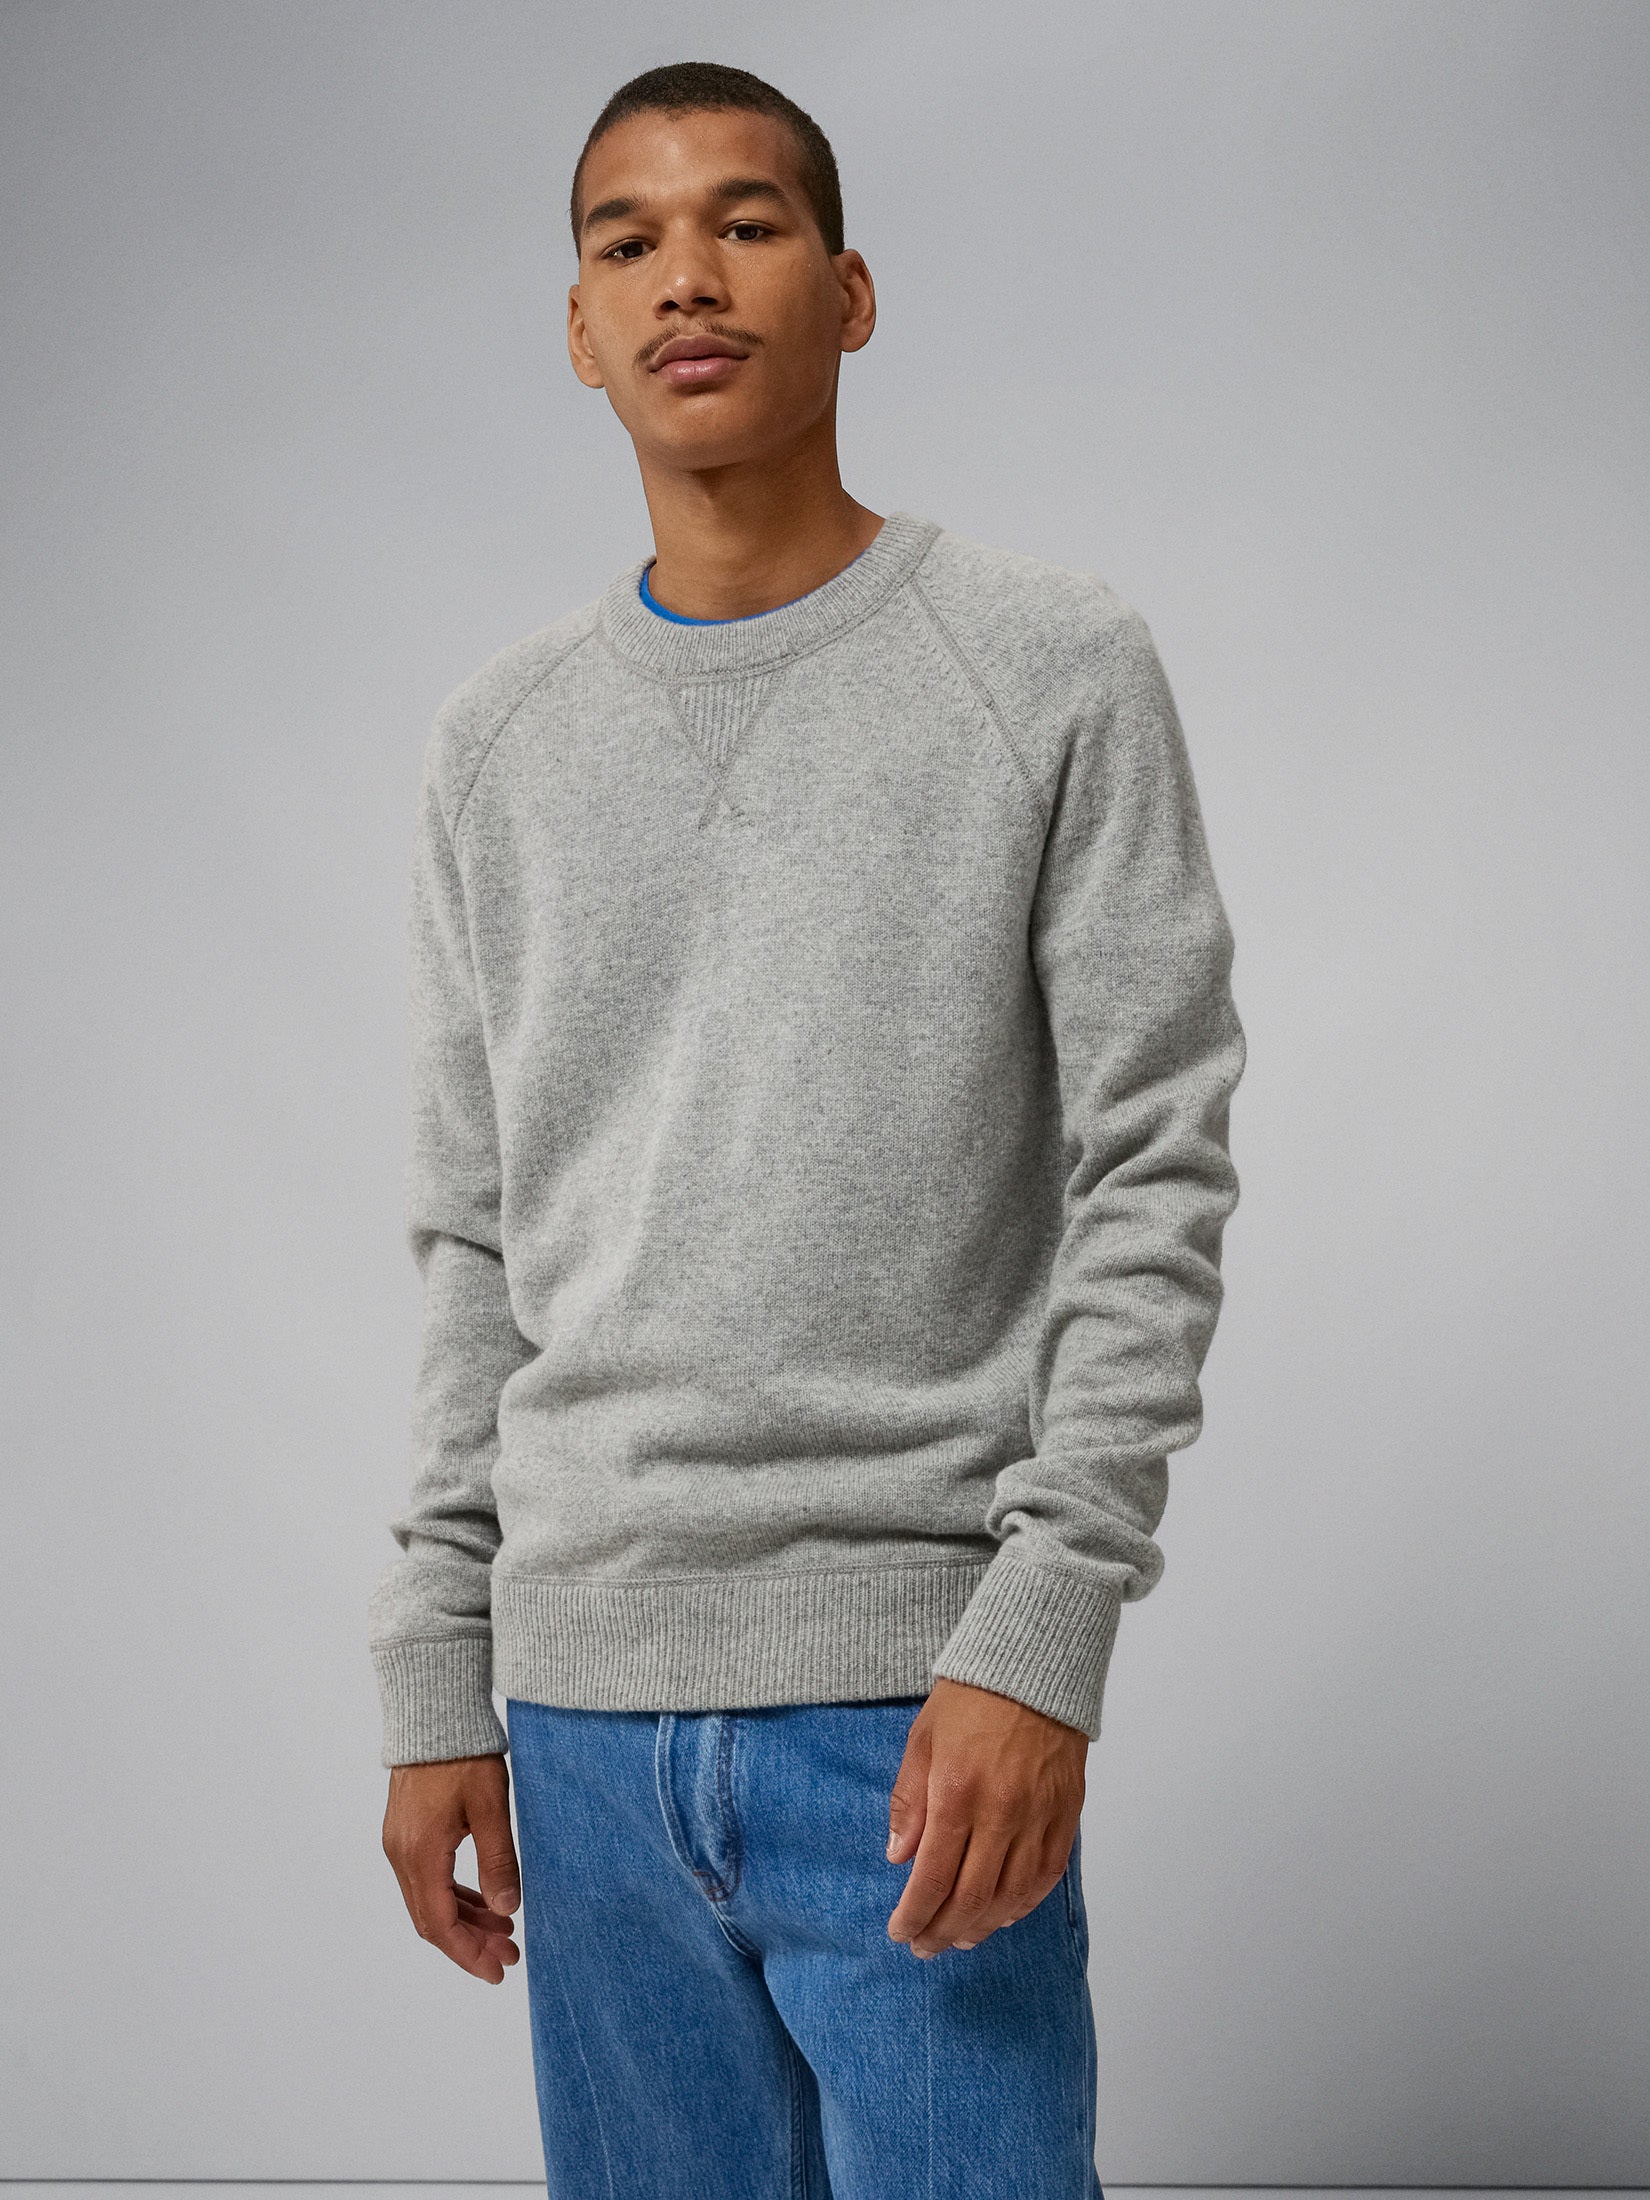 J.LINDEBERG Colton Cashmere Wool Sweater